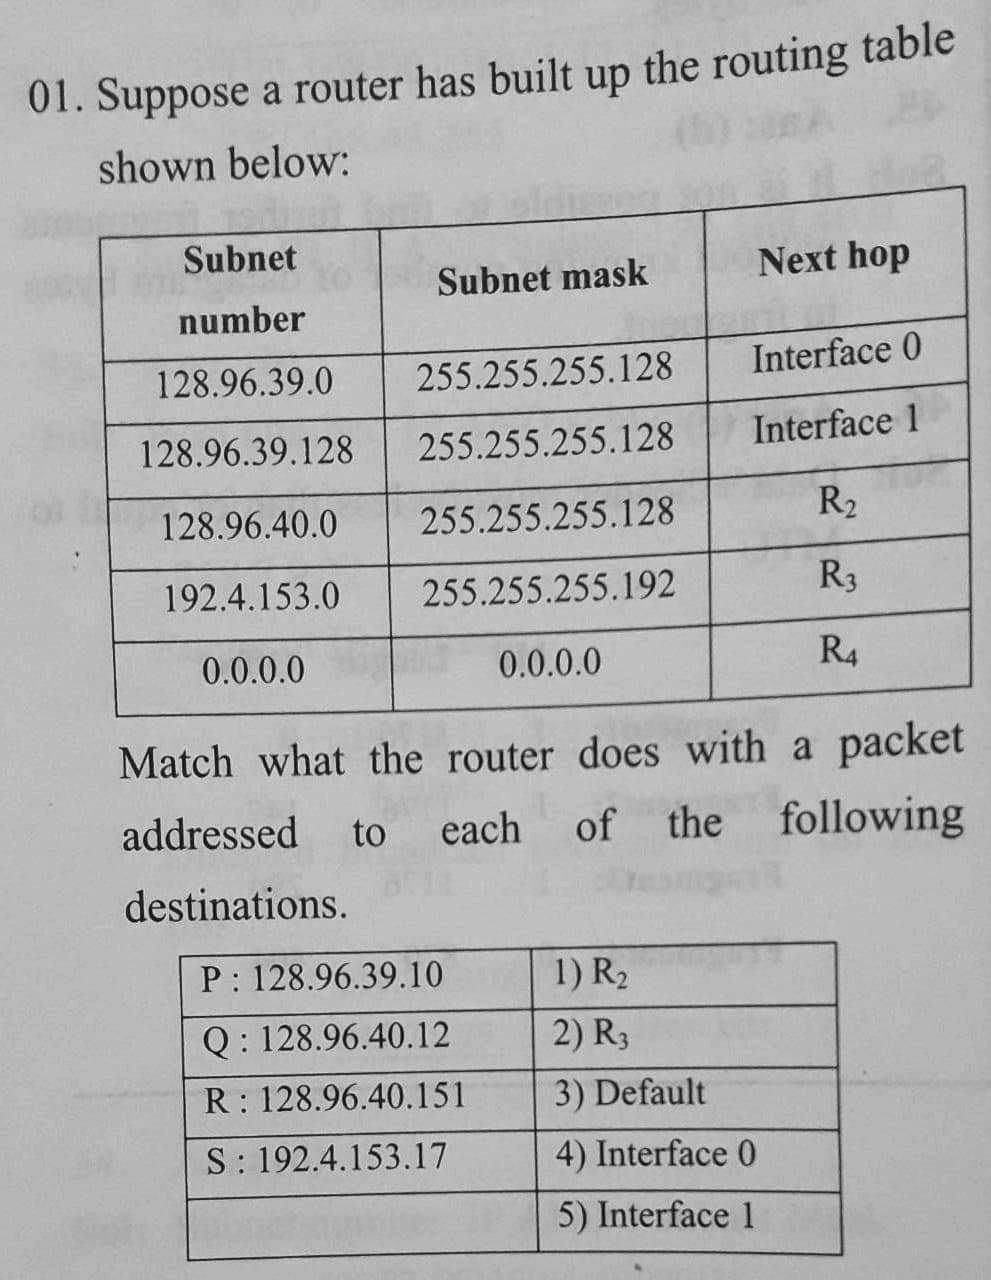 01. Suppose a router has built up the routing table
shown below:
Subnet
Subnet mask
Next hop
number
128.96.39.0
255.255.255.128
Interface 0
128.96.39.128
255.255.255.128
Interface 1
128.96.40.0
255.255.255.128
R2
192.4.153.0
255.255.255.192
R3
0.0.0.0
0.0.0.0
R4
Match what the router does with a packet
addressed to each
of the
following
destinations.
P: 128.96.39.10
1) R2
Q: 128.96.40.12
2) R3
R: 128.96.40.151
3) Default
S: 192.4.153.17
4) Interface 0
5) Interface 1
